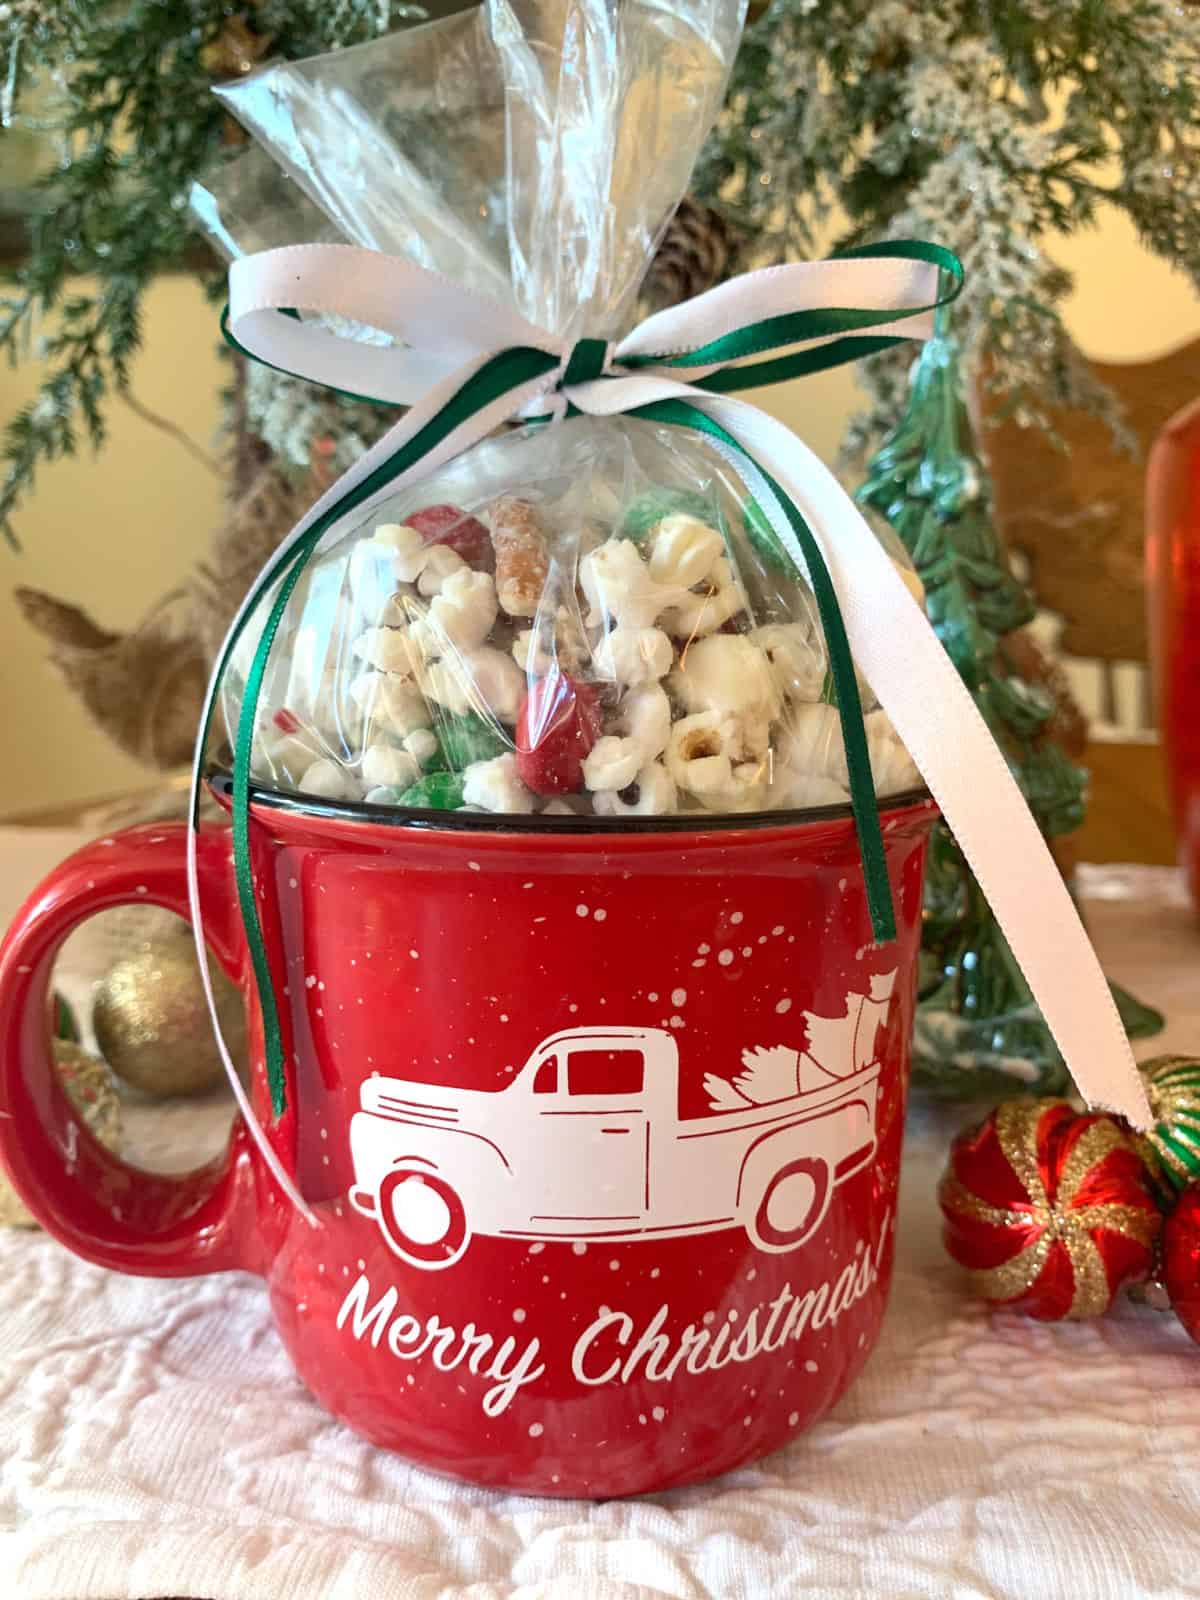 A red Christmas mug filled with popcorn crunch.